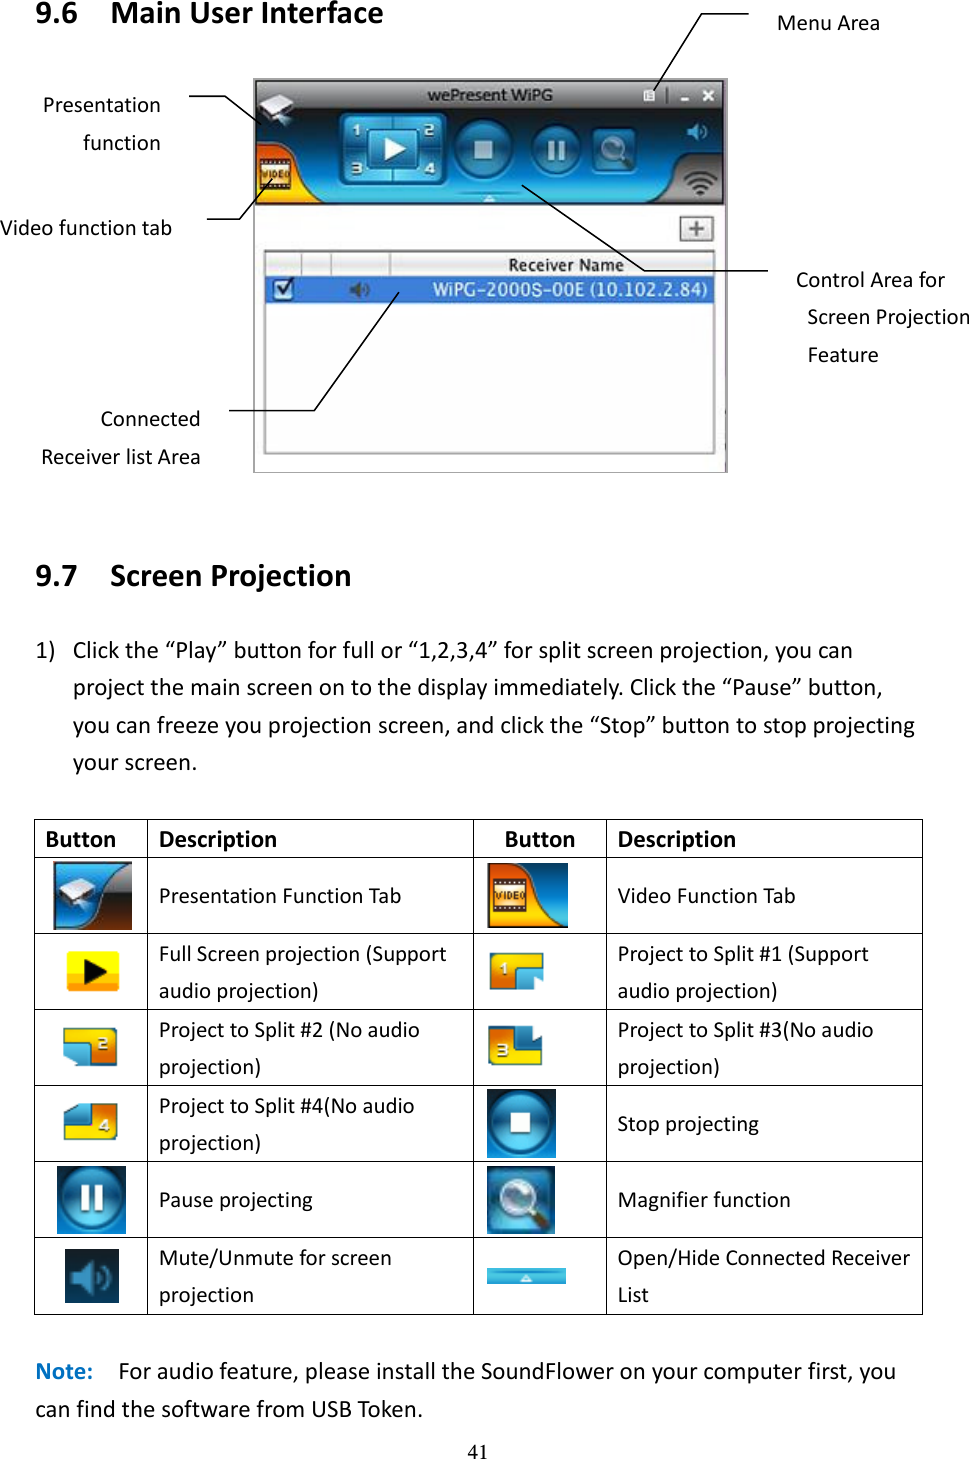   41 9.6 Main User Interface       9.7 Screen Projection 1) Click the “Play” button for full or “1,2,3,4” for split screen projection, you can project the main screen on to the display immediately. Click the “Pause” button, you can freeze you projection screen, and click the “Stop” button to stop projecting your screen.    Button Description Button Description  Presentation Function Tab  Video Function Tab  Full Screen projection (Support audio projection)  Project to Split #1 (Support audio projection)  Project to Split #2 (No audio projection)  Project to Split #3(No audio projection)  Project to Split #4(No audio projection)  Stop projecting  Pause projecting  Magnifier function  Mute/Unmute for screen projection  Open/Hide Connected Receiver List  Note:    For audio feature, please install the SoundFlower on your computer first, you can find the software from USB Token.   Control Area for Screen Projection Feature Menu Area Video function tab Presentation function Connected   Receiver list Area 